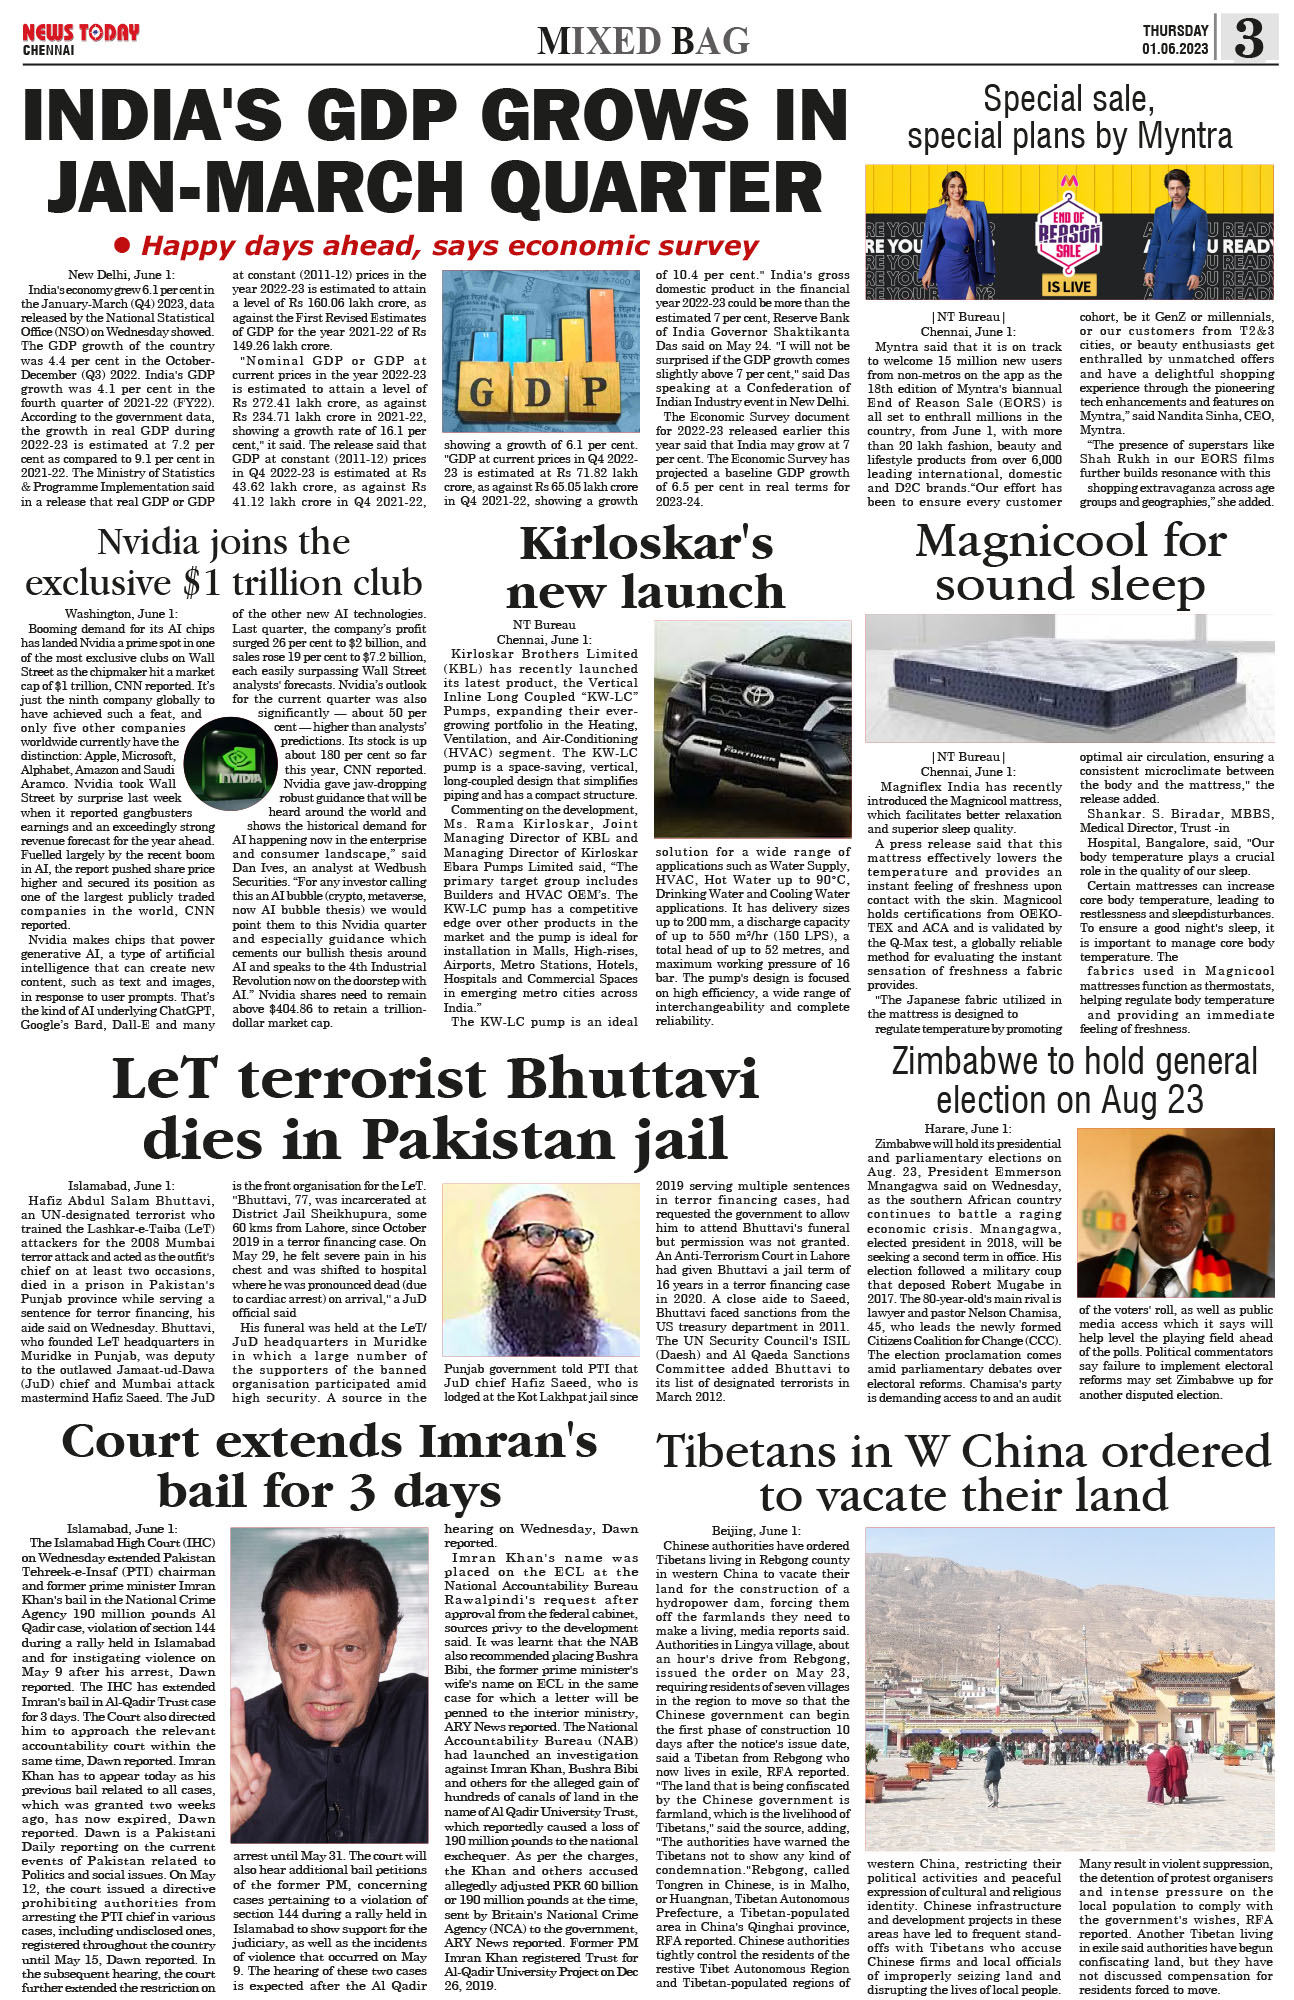 Epaper 1 June 2023 News Today First with the news